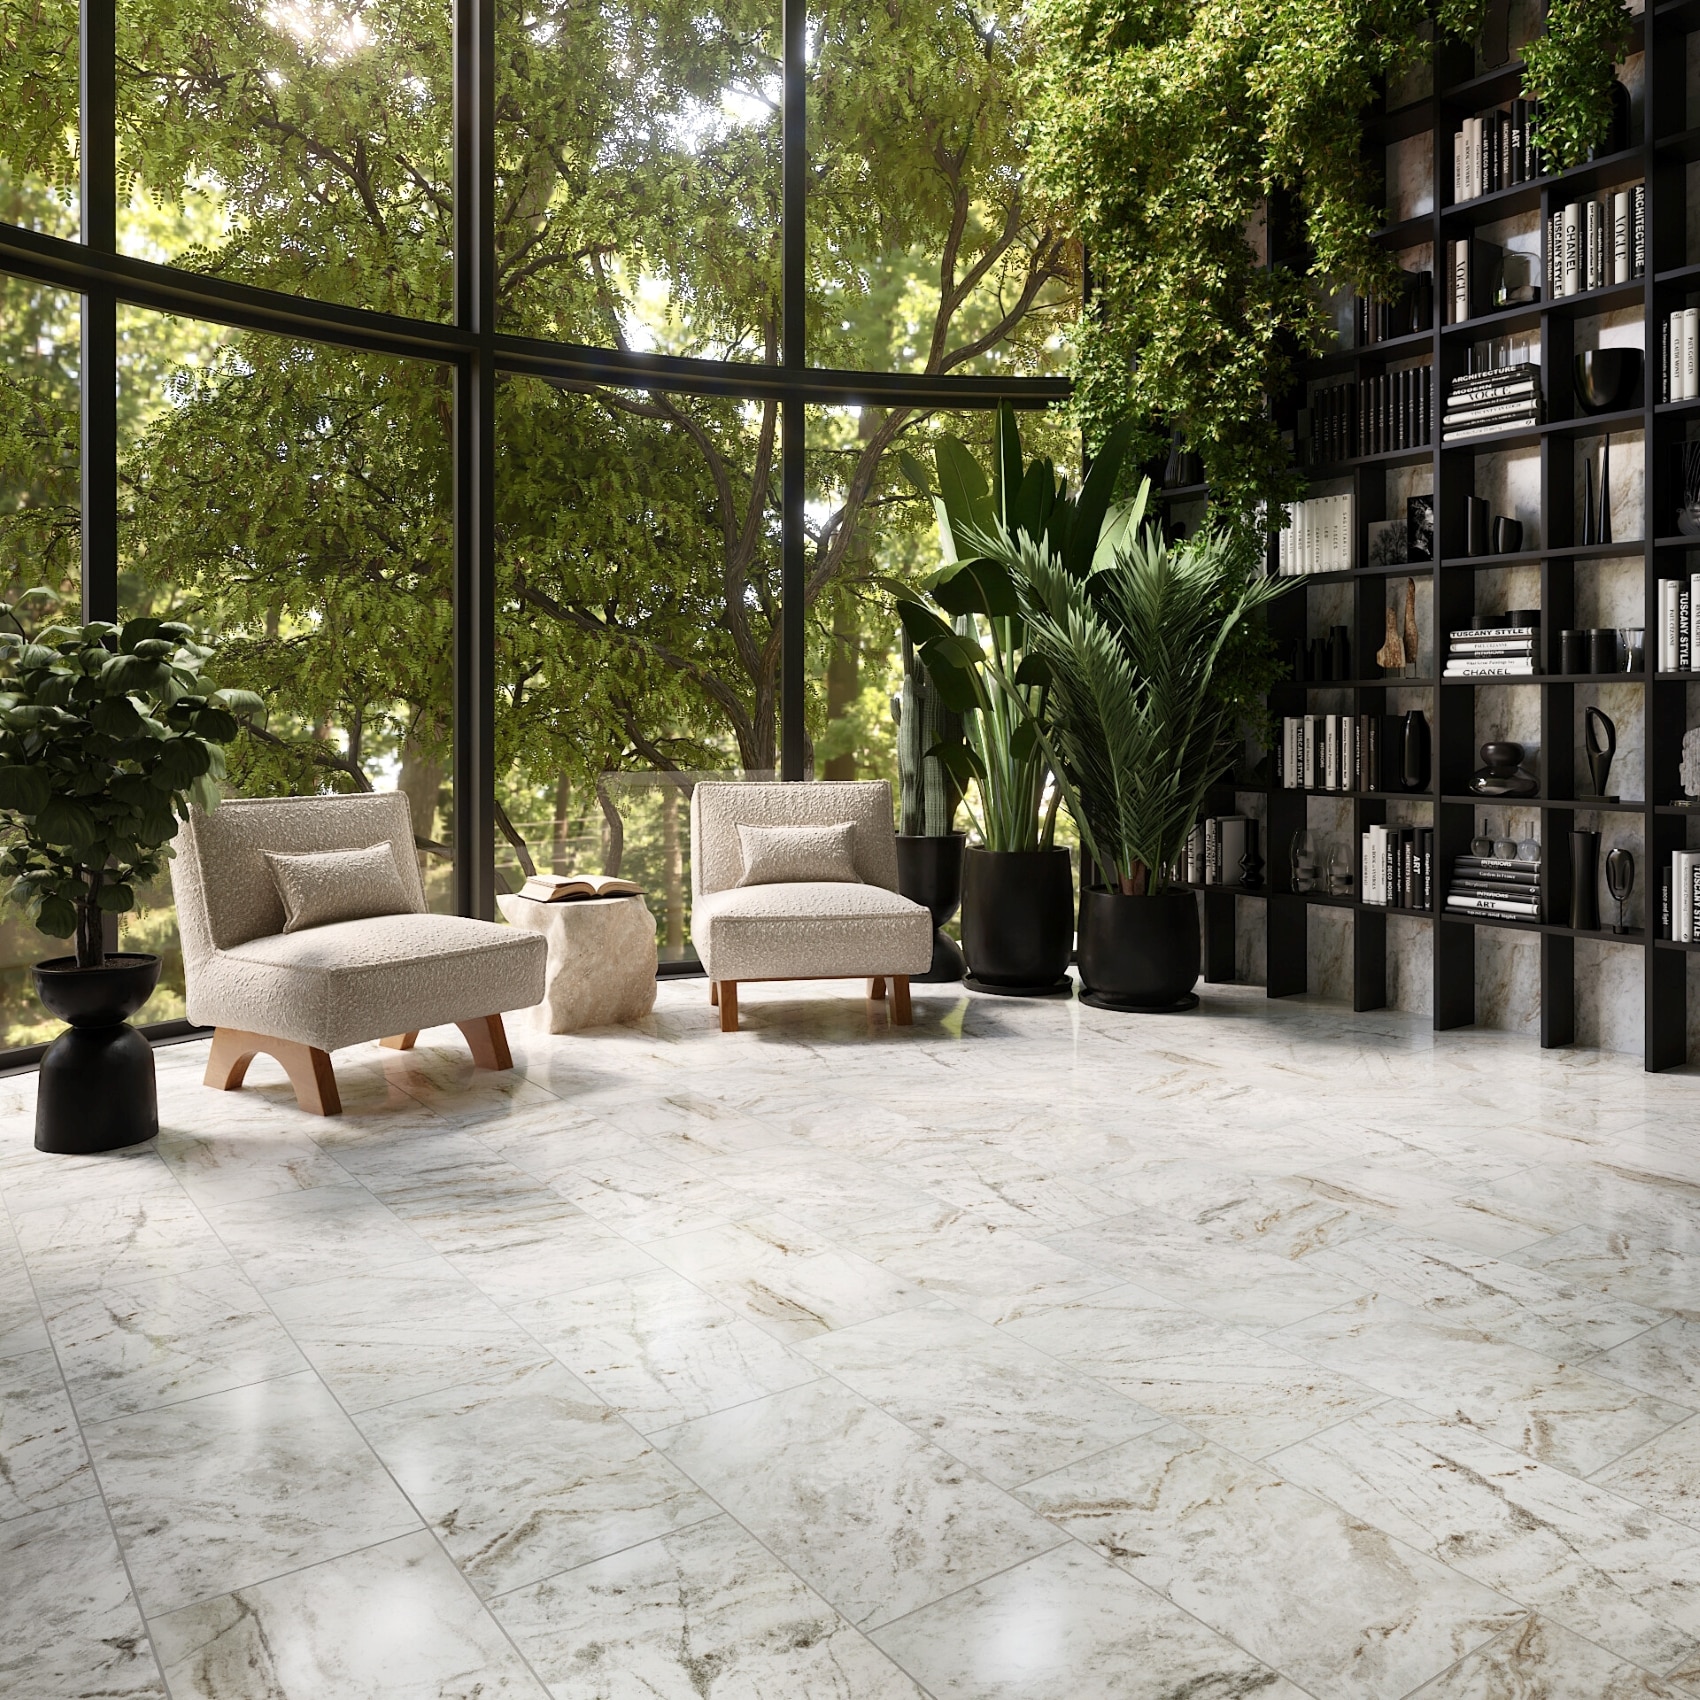 Library with plants inside and greenery outside and a marble floor next to the bookcase.